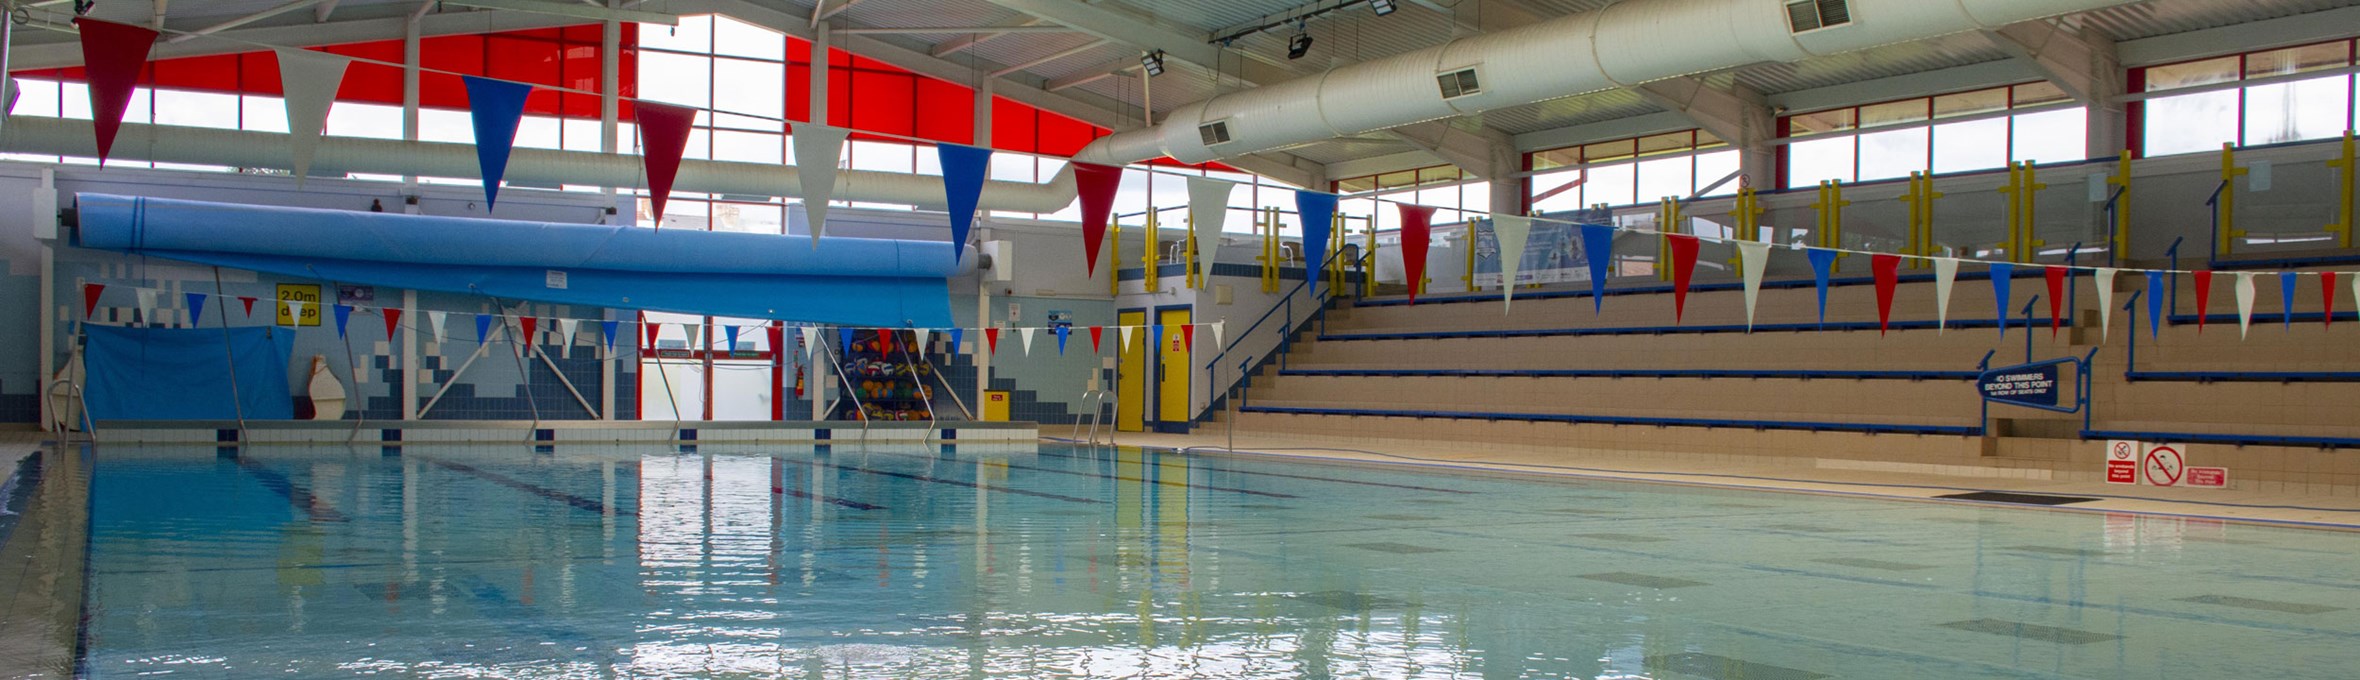 A view of an empty swimming pool with bunting across the roof